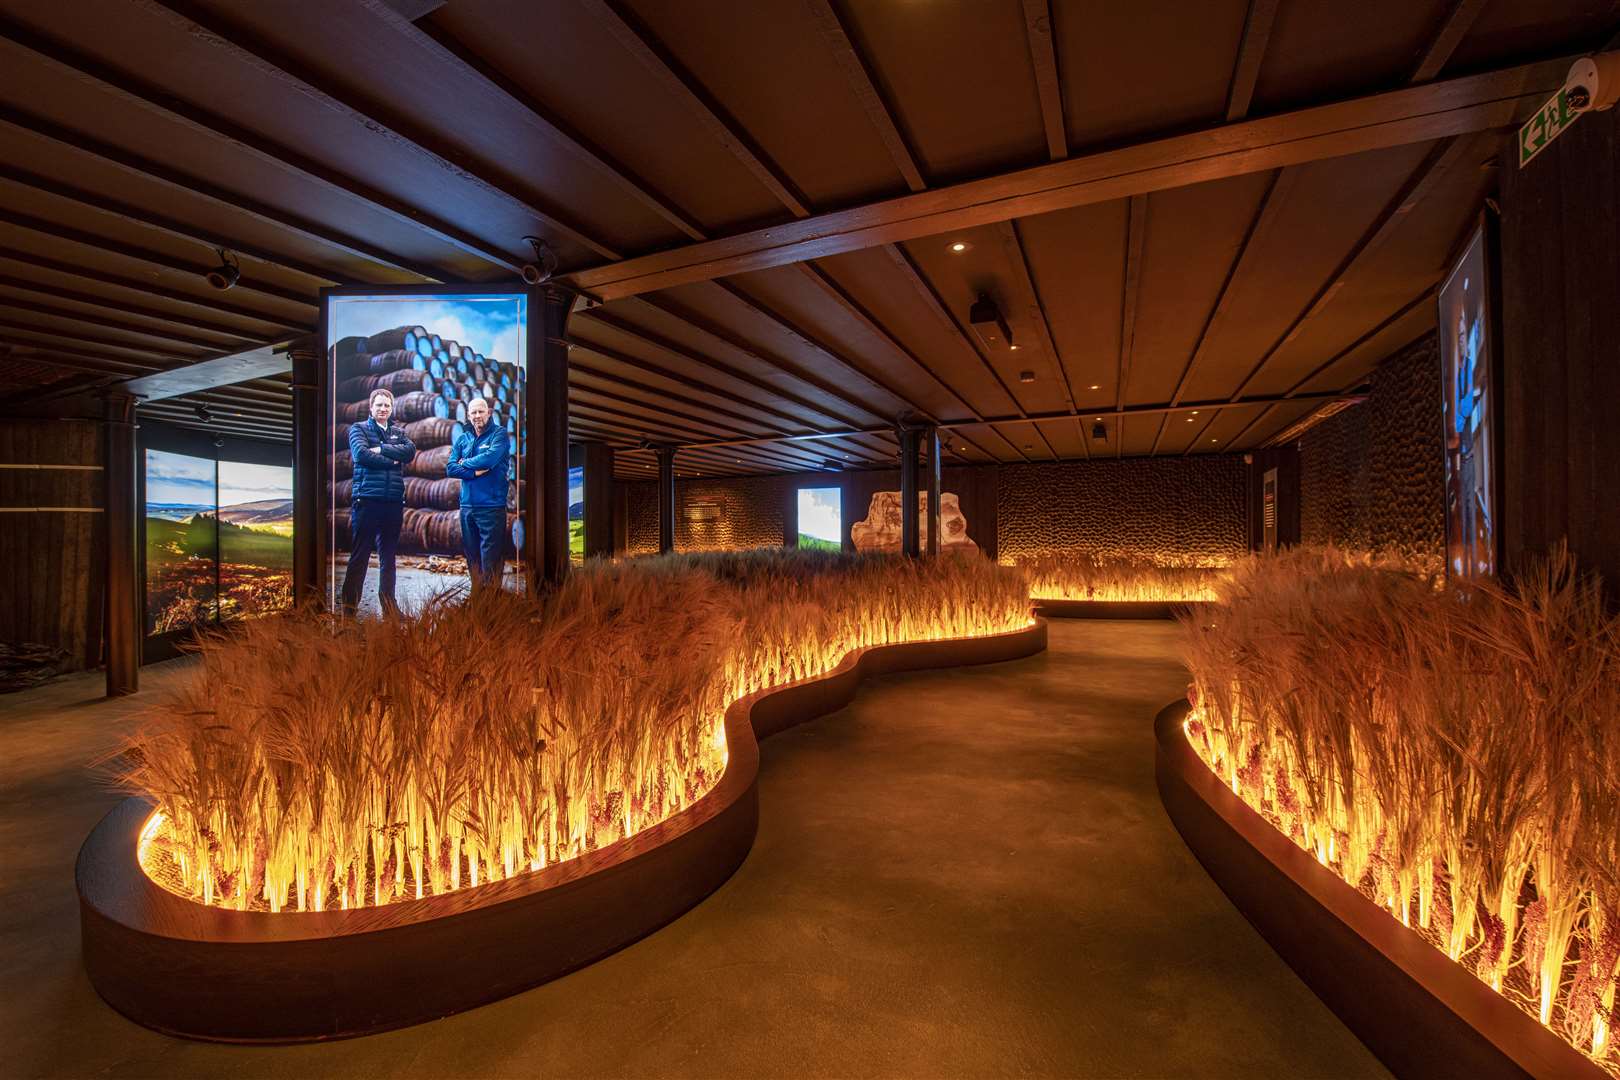 Locally-grown barley at the Glenlivet Distillery visitor centre's Speyside Room. Picture: John Paul.